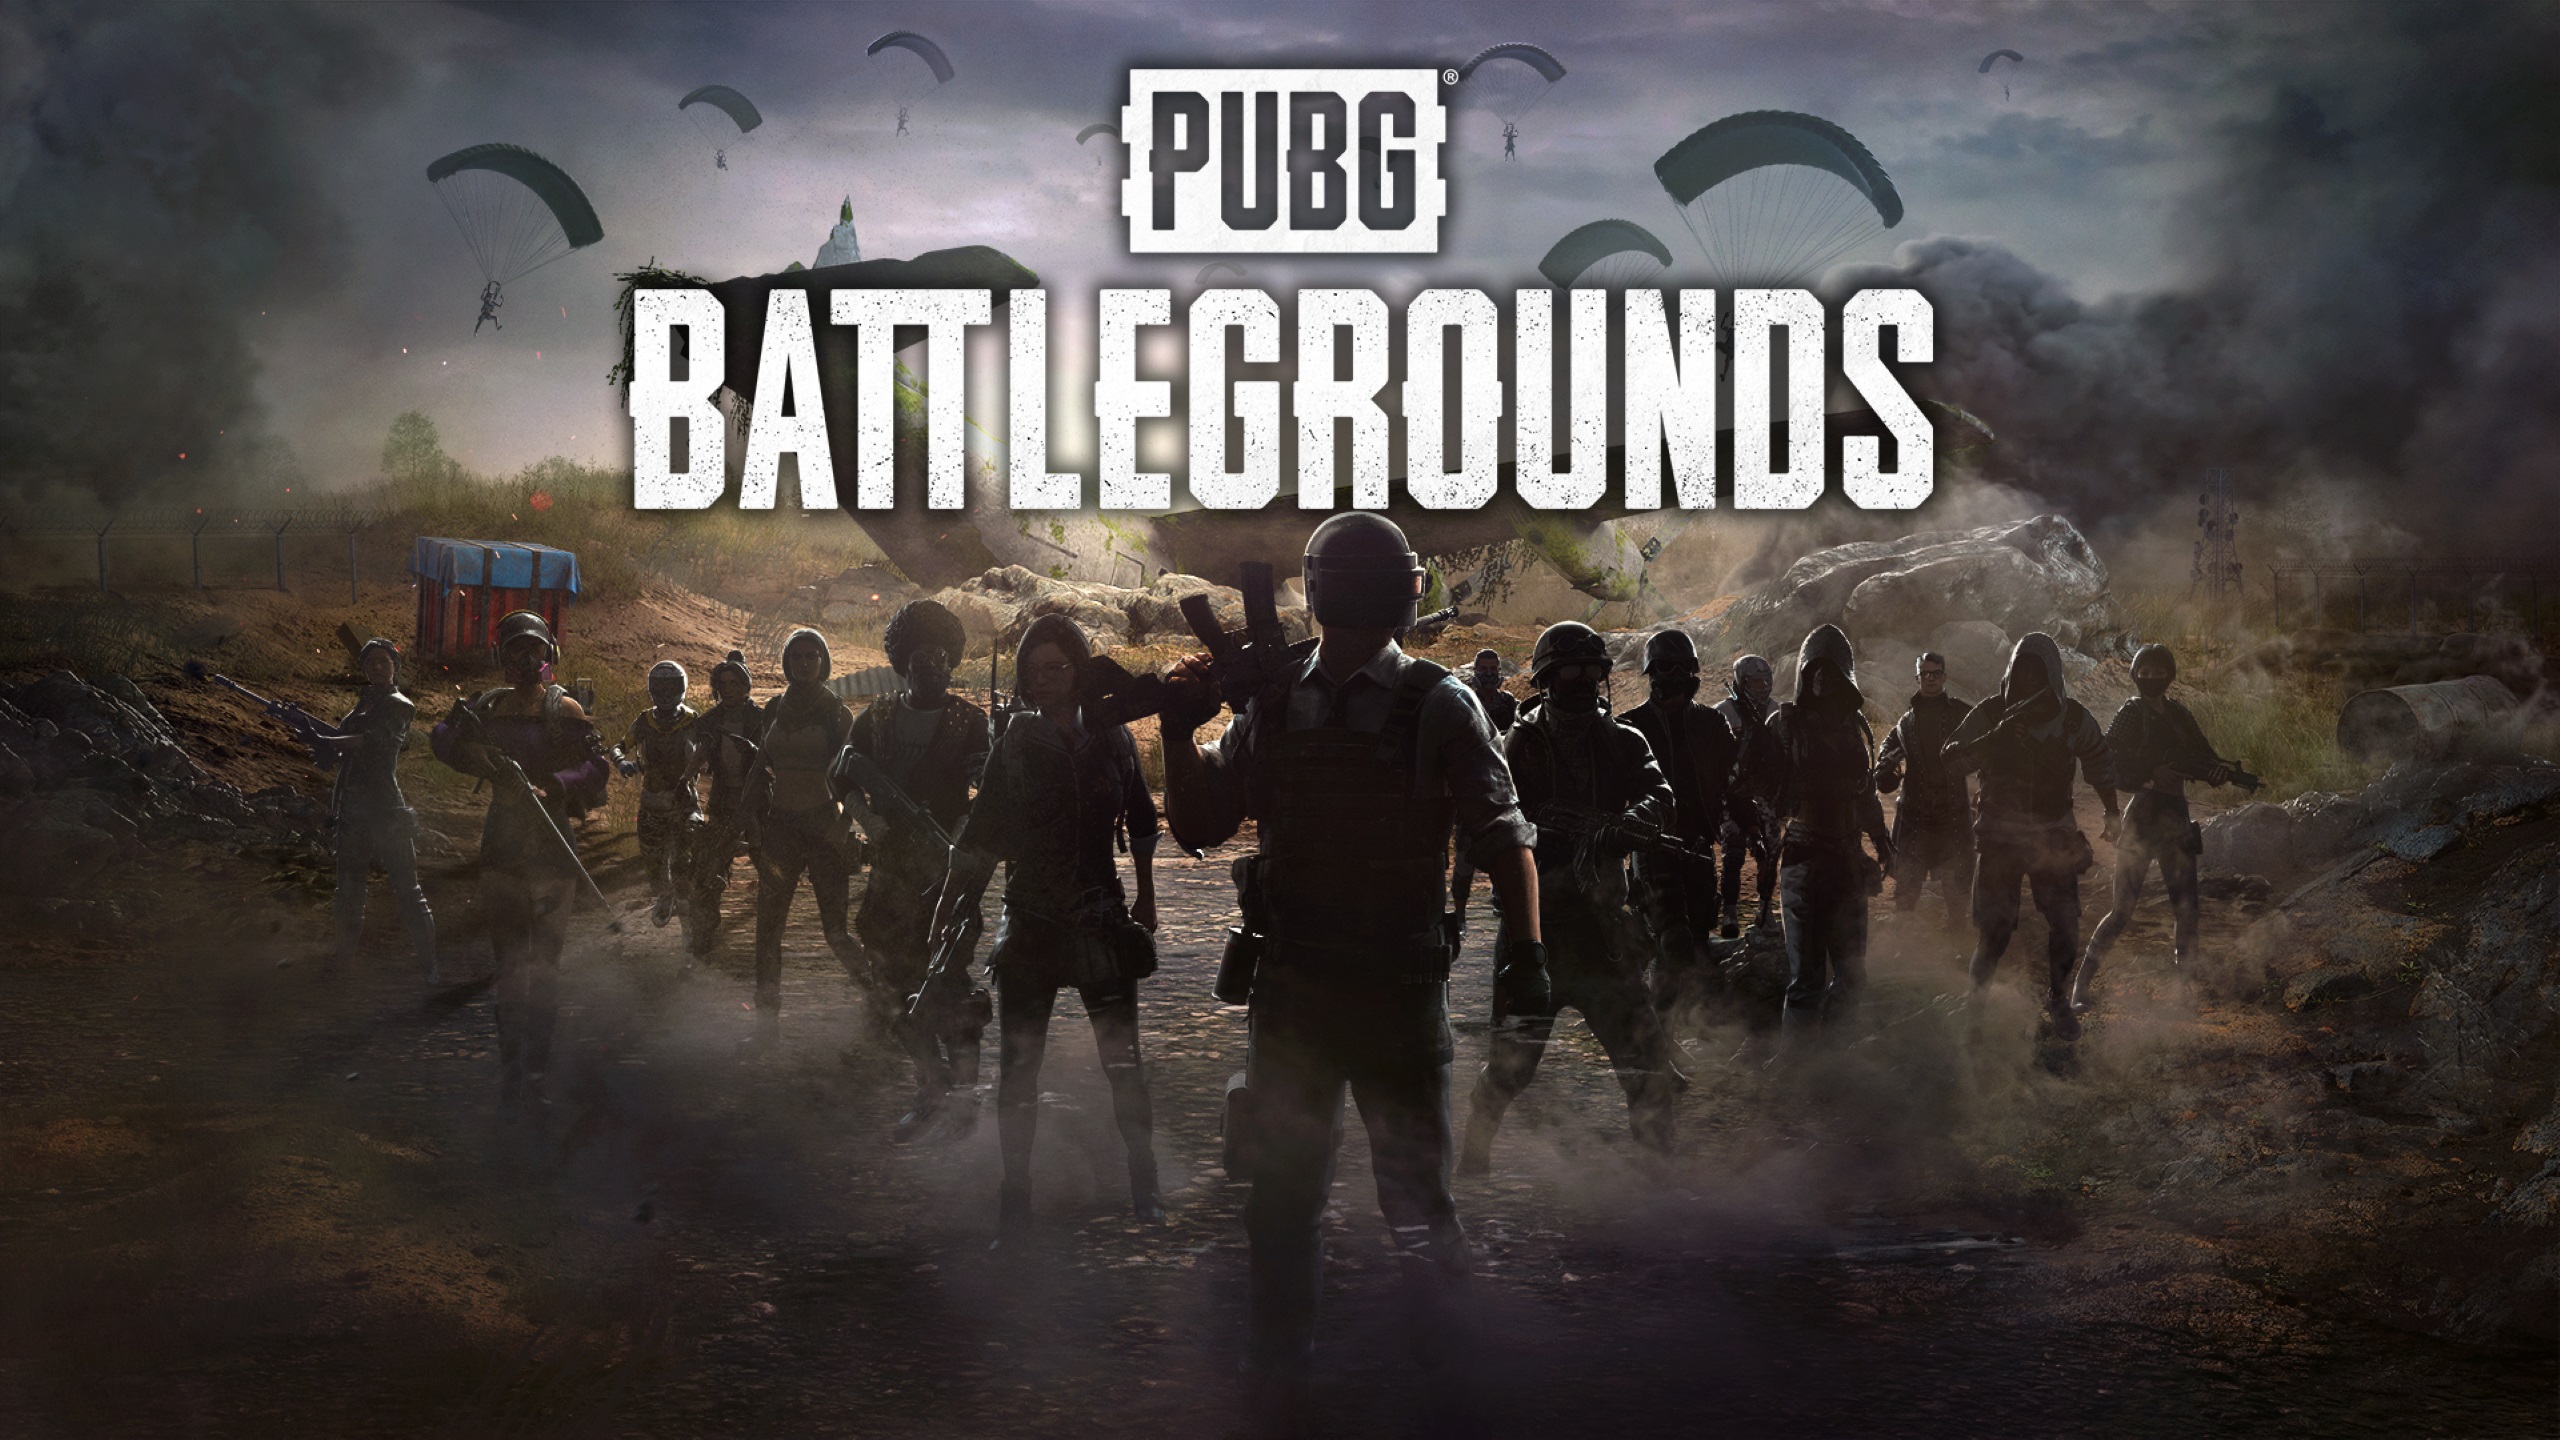 PUBG is still popular - developers report a record increase in players